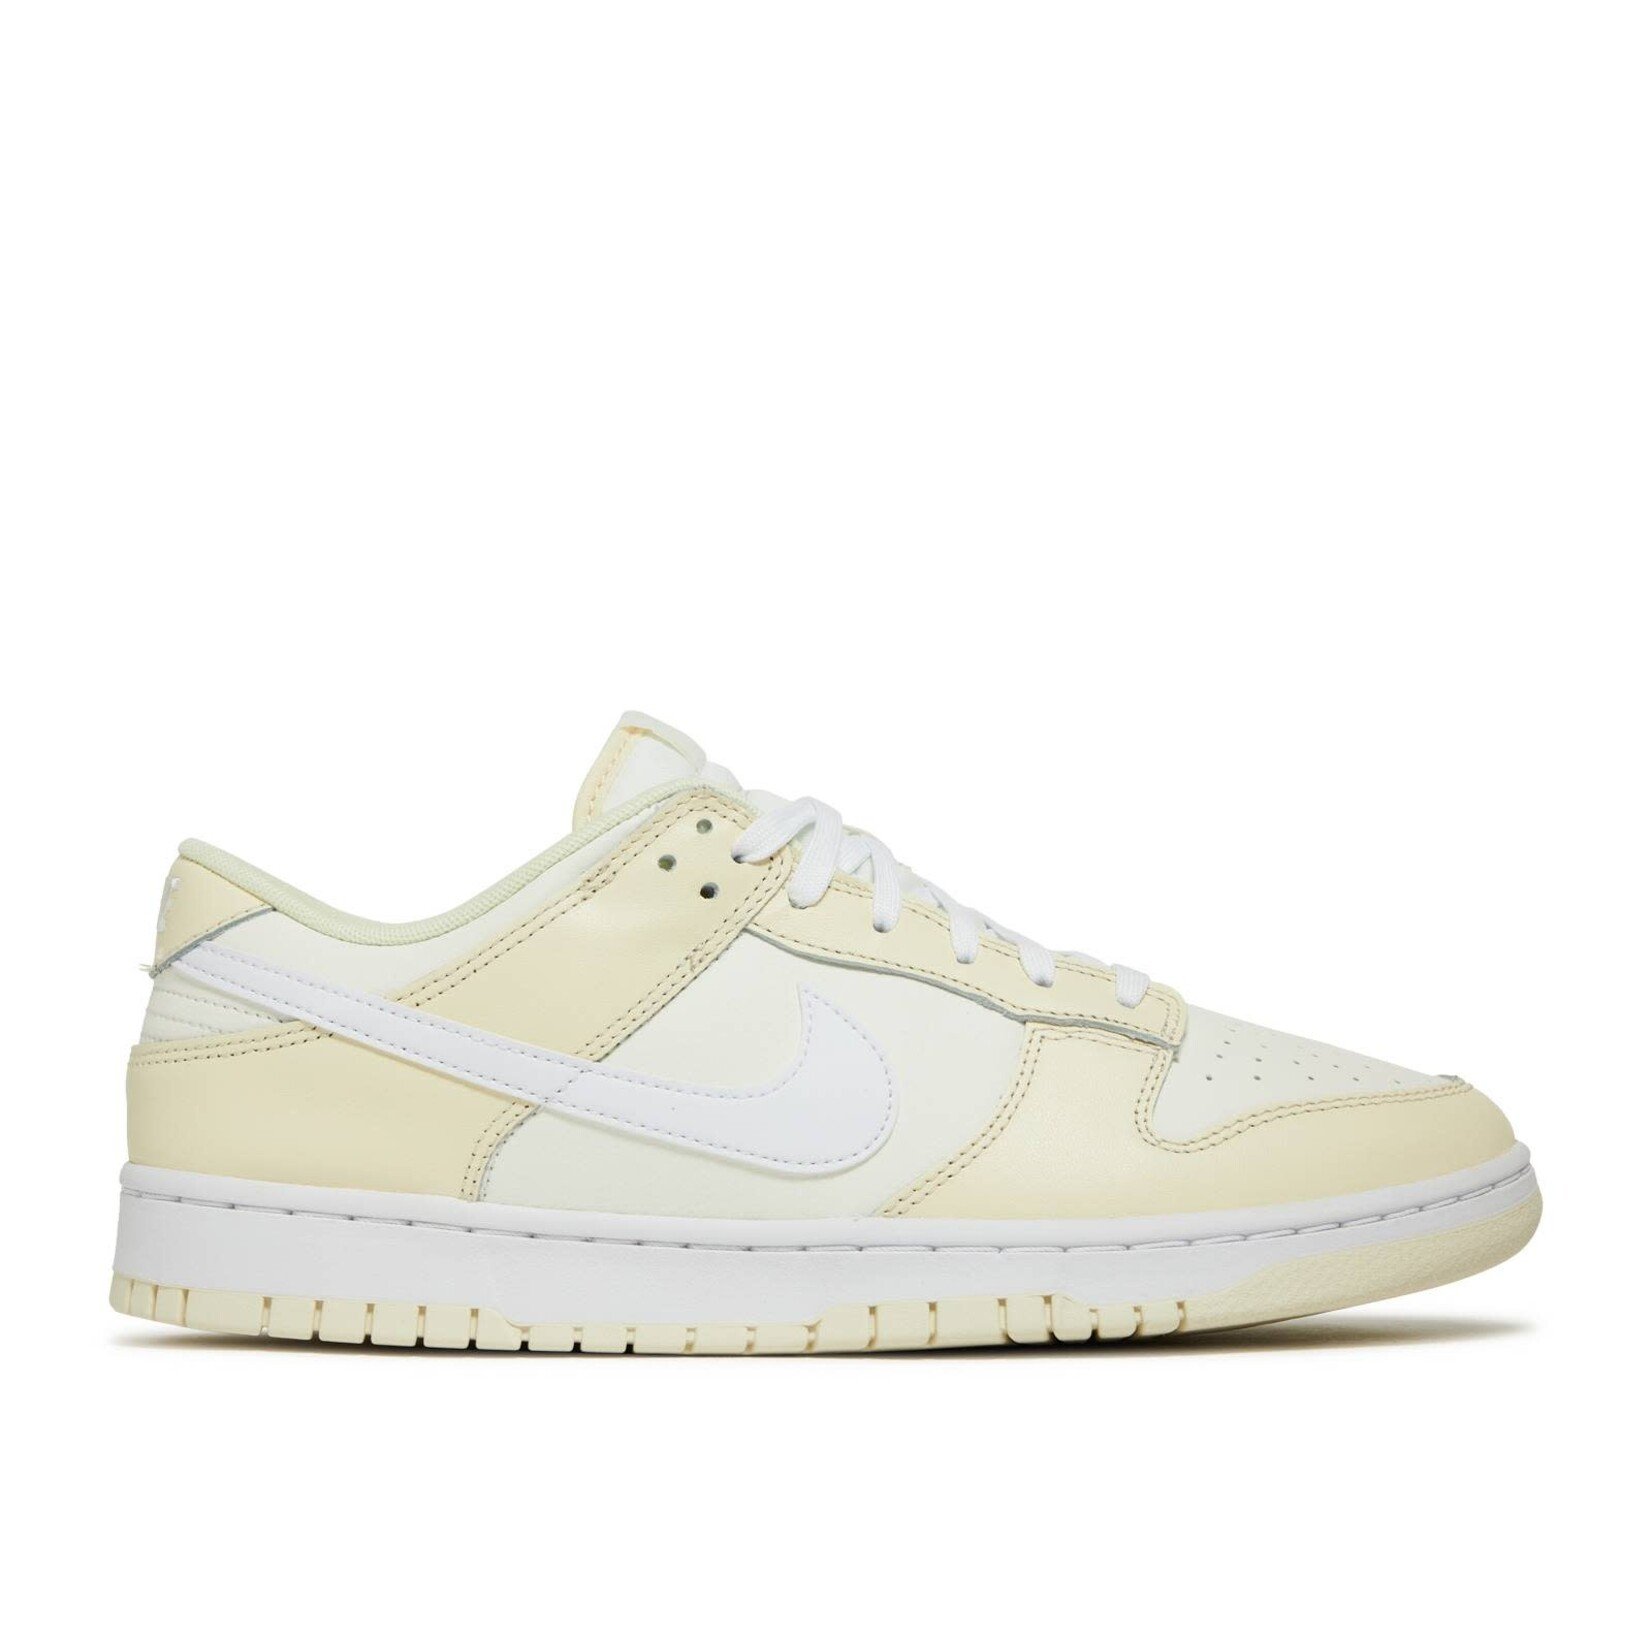 Nike Nike Dunk Low Coconut Milk Size 8, DS BRAND NEW